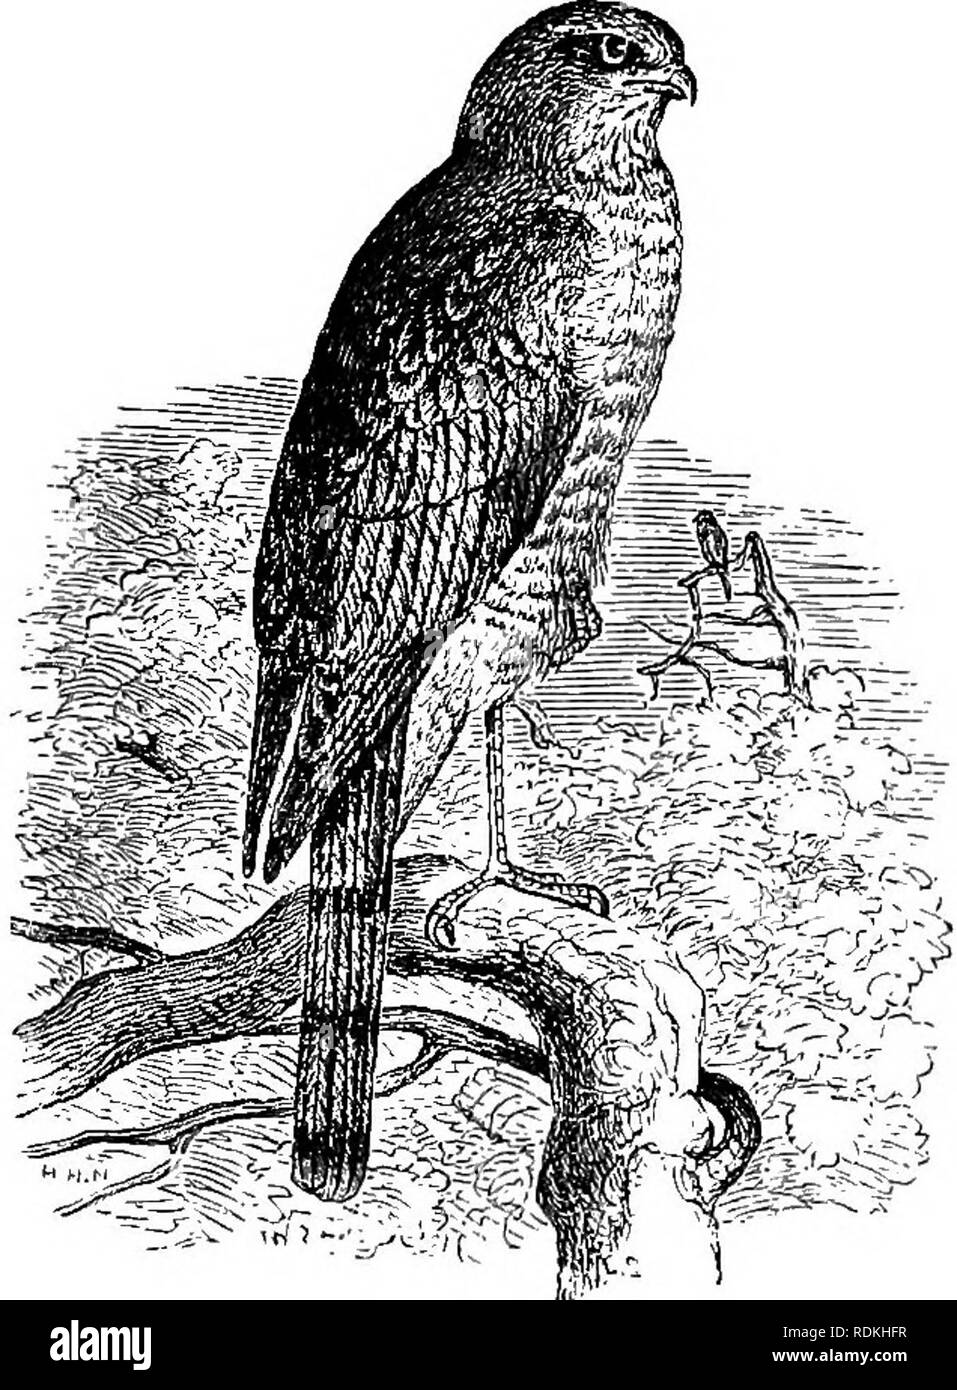 . The birds of Illinois and Wisconsin. Birds; Birds. 4s6 Field Museum op Natural History — Zoology, Vol. IX. In southern Illinois it occurs more or less commonly in winter. W. W. Cooke says: &quot;During the winter of 1884-85 the Marsh Hawk was plentiful at Paris, 111.&quot; (Bird Migr. Miss. Val., 1888, p. 113.) The nest is placed on the ground in grassy marshes. The eggs are usually 4 or 5, dull white or faintly tinged bluish or greenish, and measure about 1.85 x 1.45 inches. The Field Museum collection contains sets of eggs of this species taken between May 14 and June 15. Although the majo Stock Photo